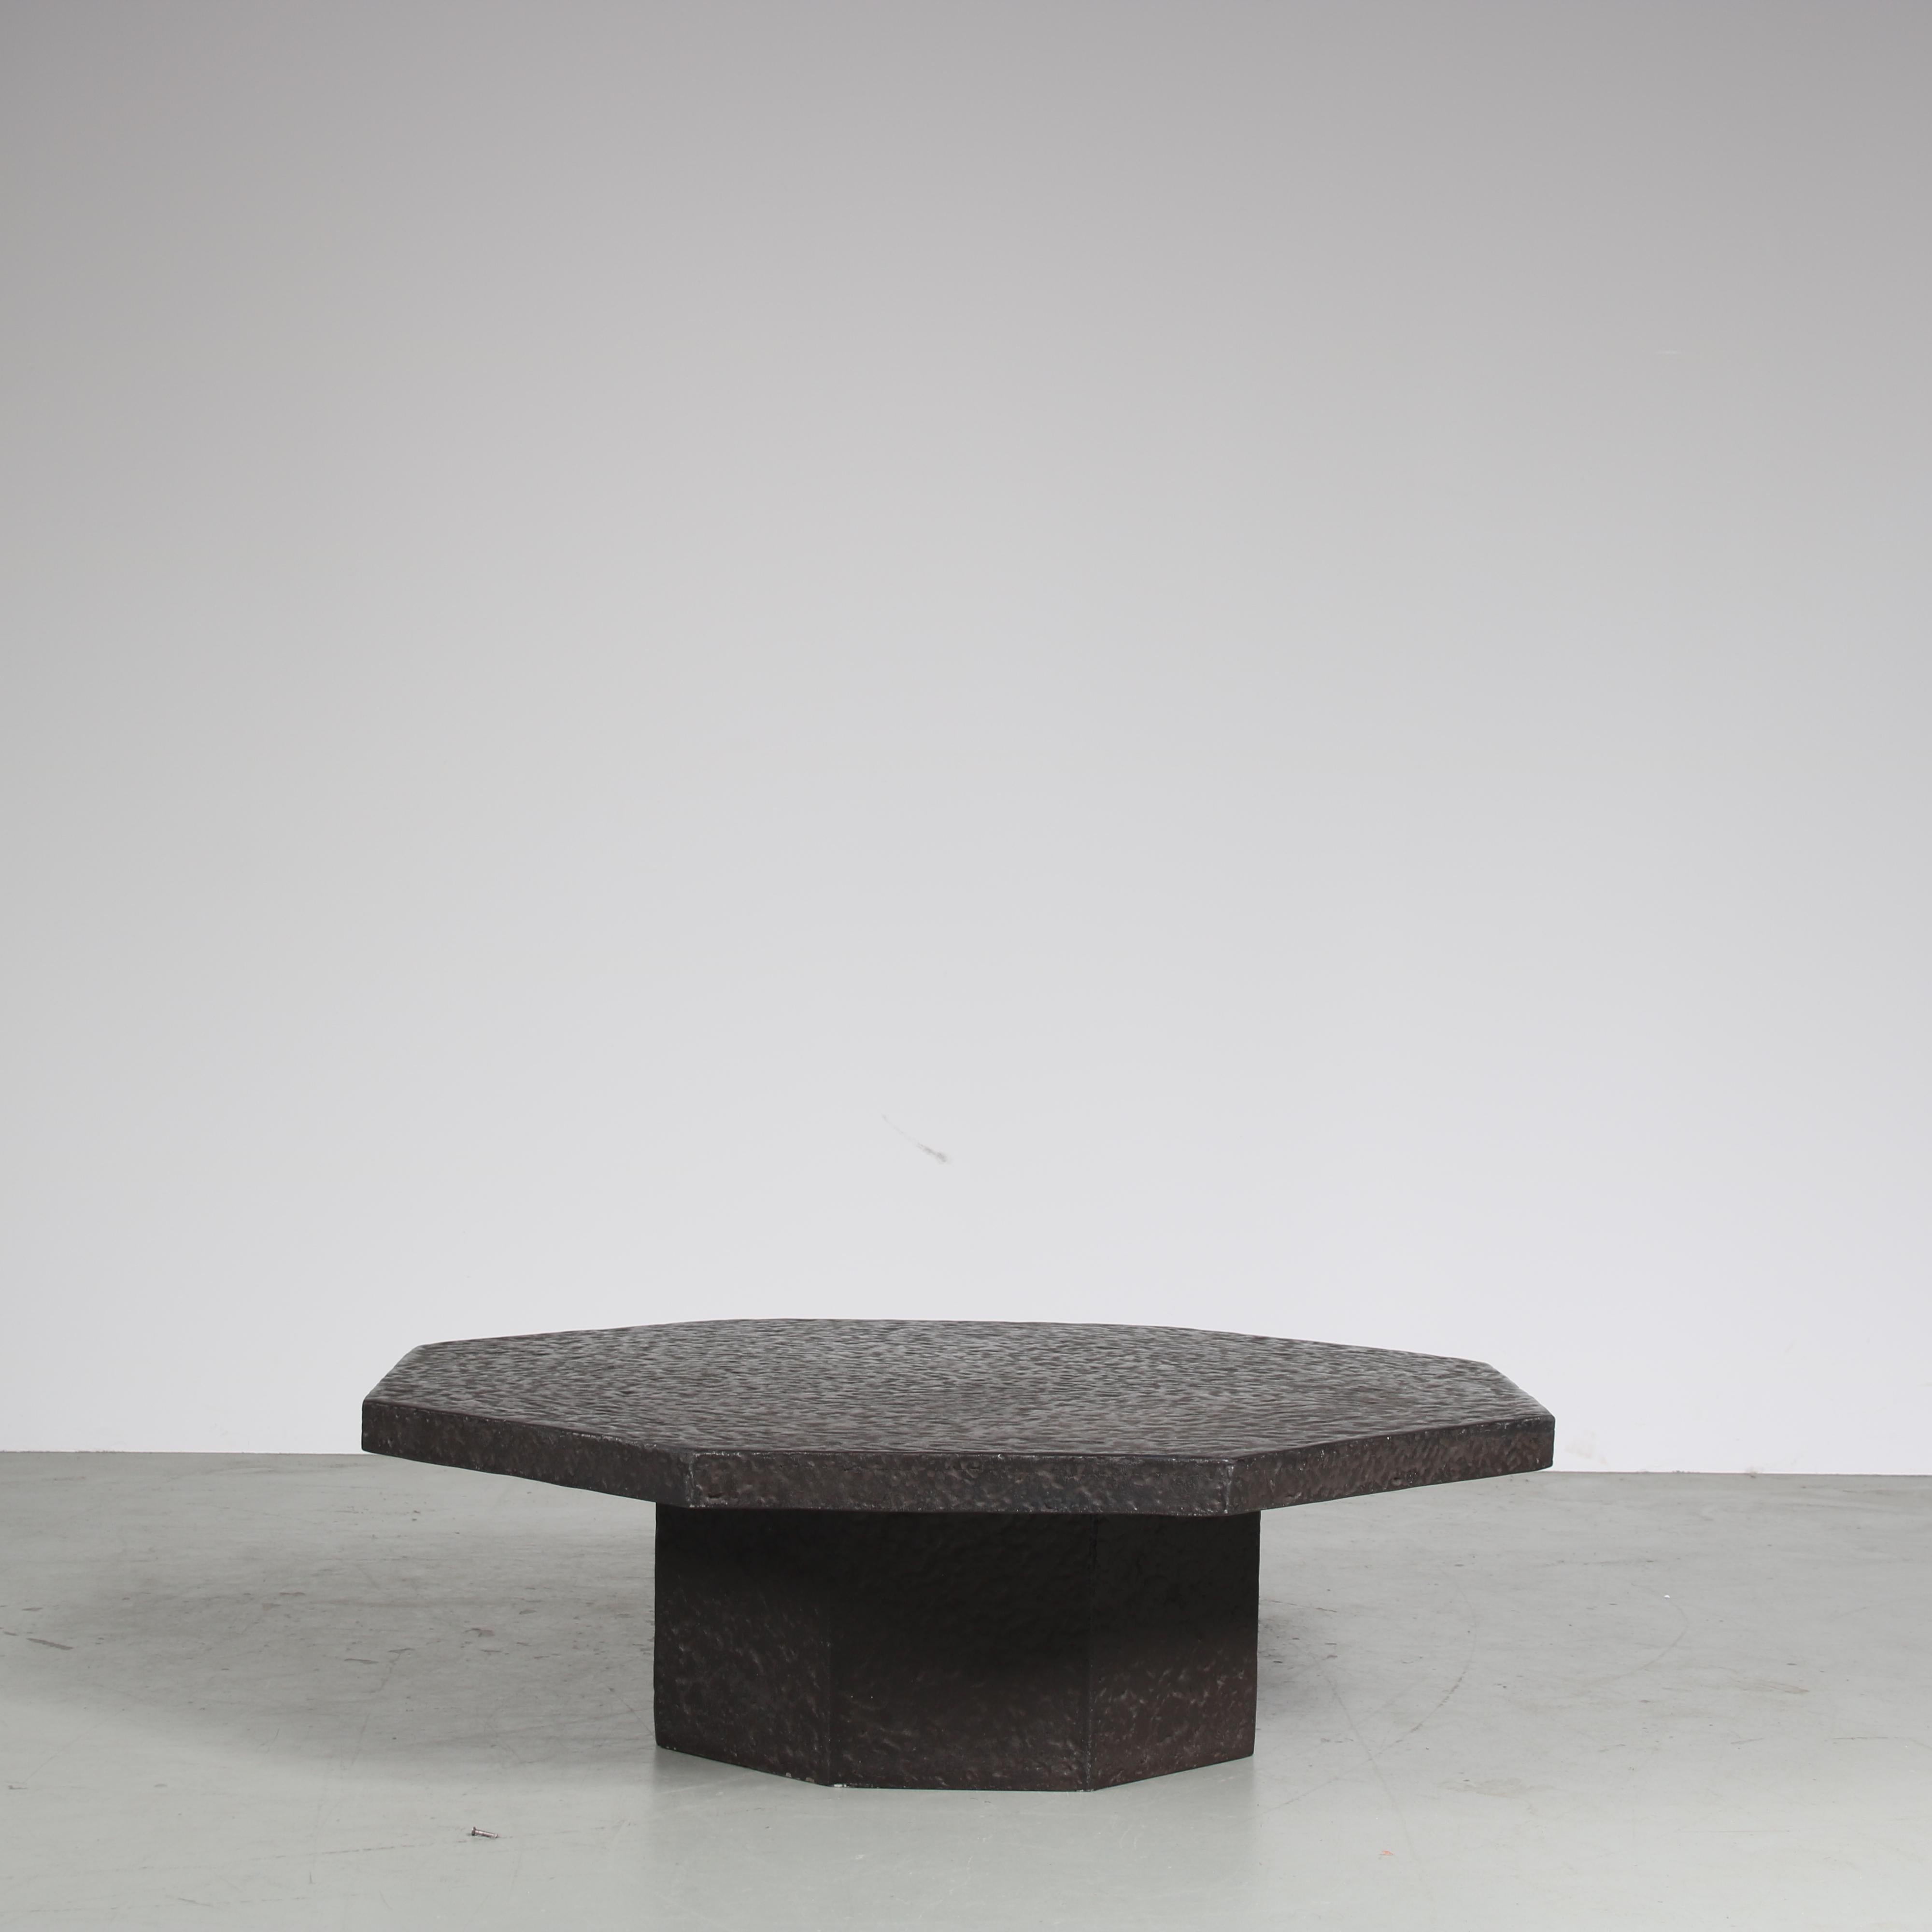 A unique coffee table, manufactured in the Netherlands around 1970.

This brutalist style piece has a strong appearance with octogan shaped top and a sturdy look. It is made of high quality resin in a stone look. A very nice use of materials that